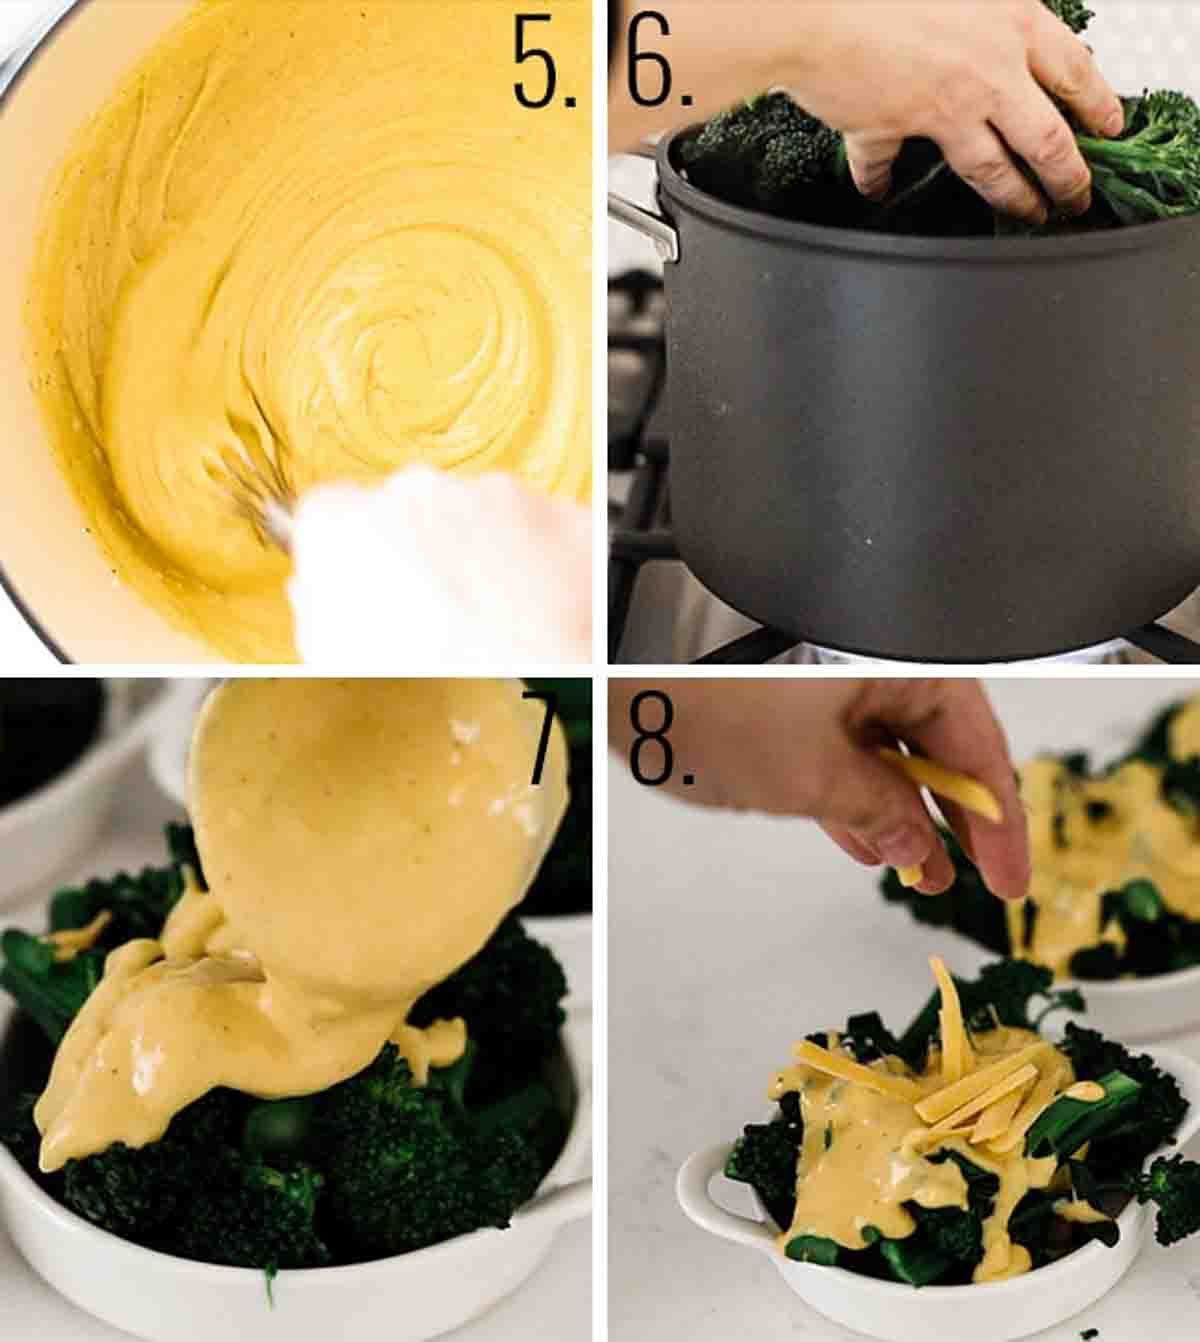 Collage showing how to prepare broccoli and cheese sauce.